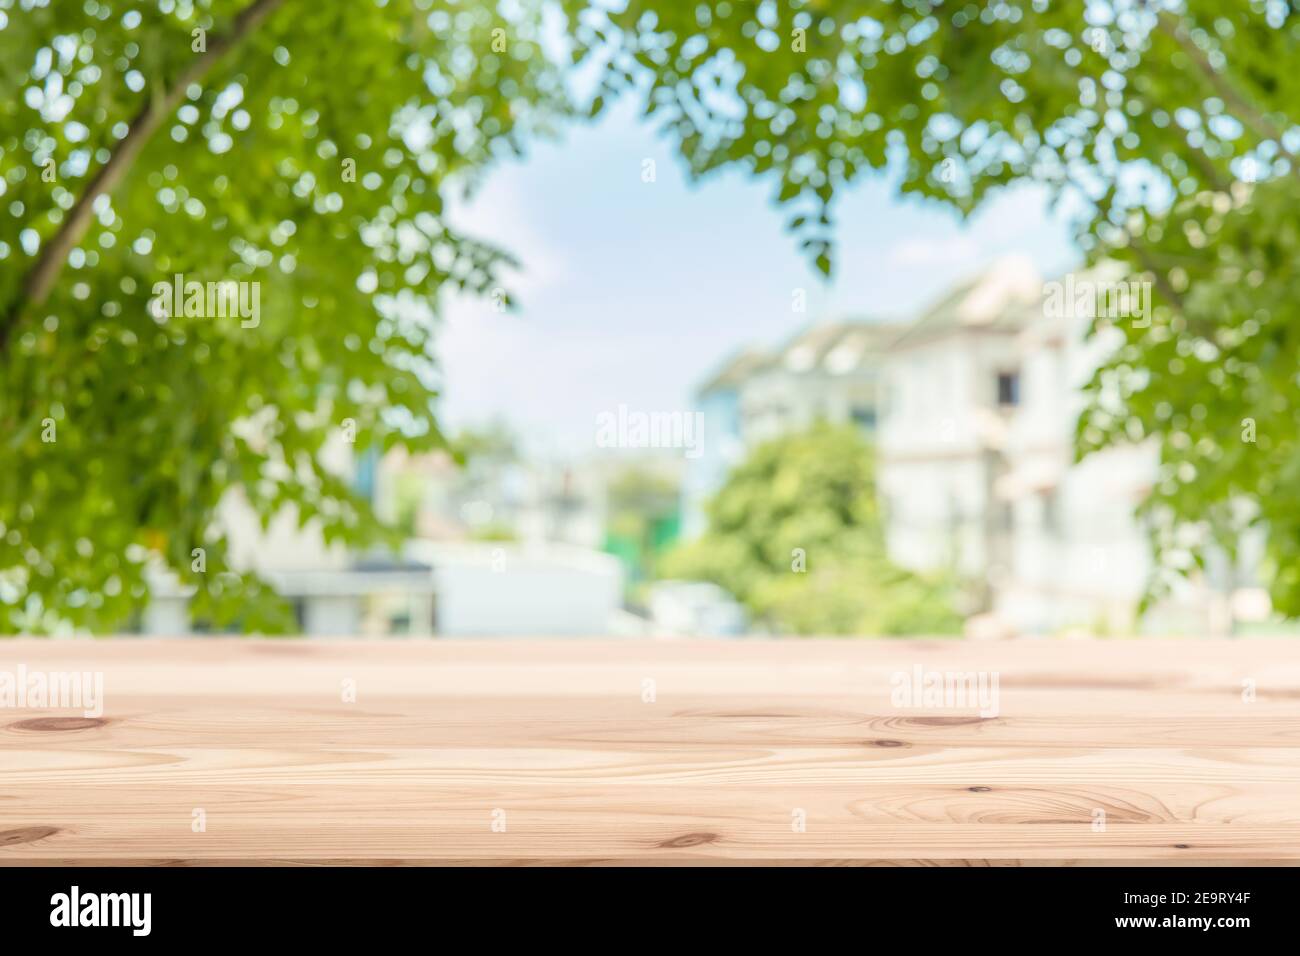 Green town home eco community blur background with wooden table foreground space for products advertising template Stock Photo